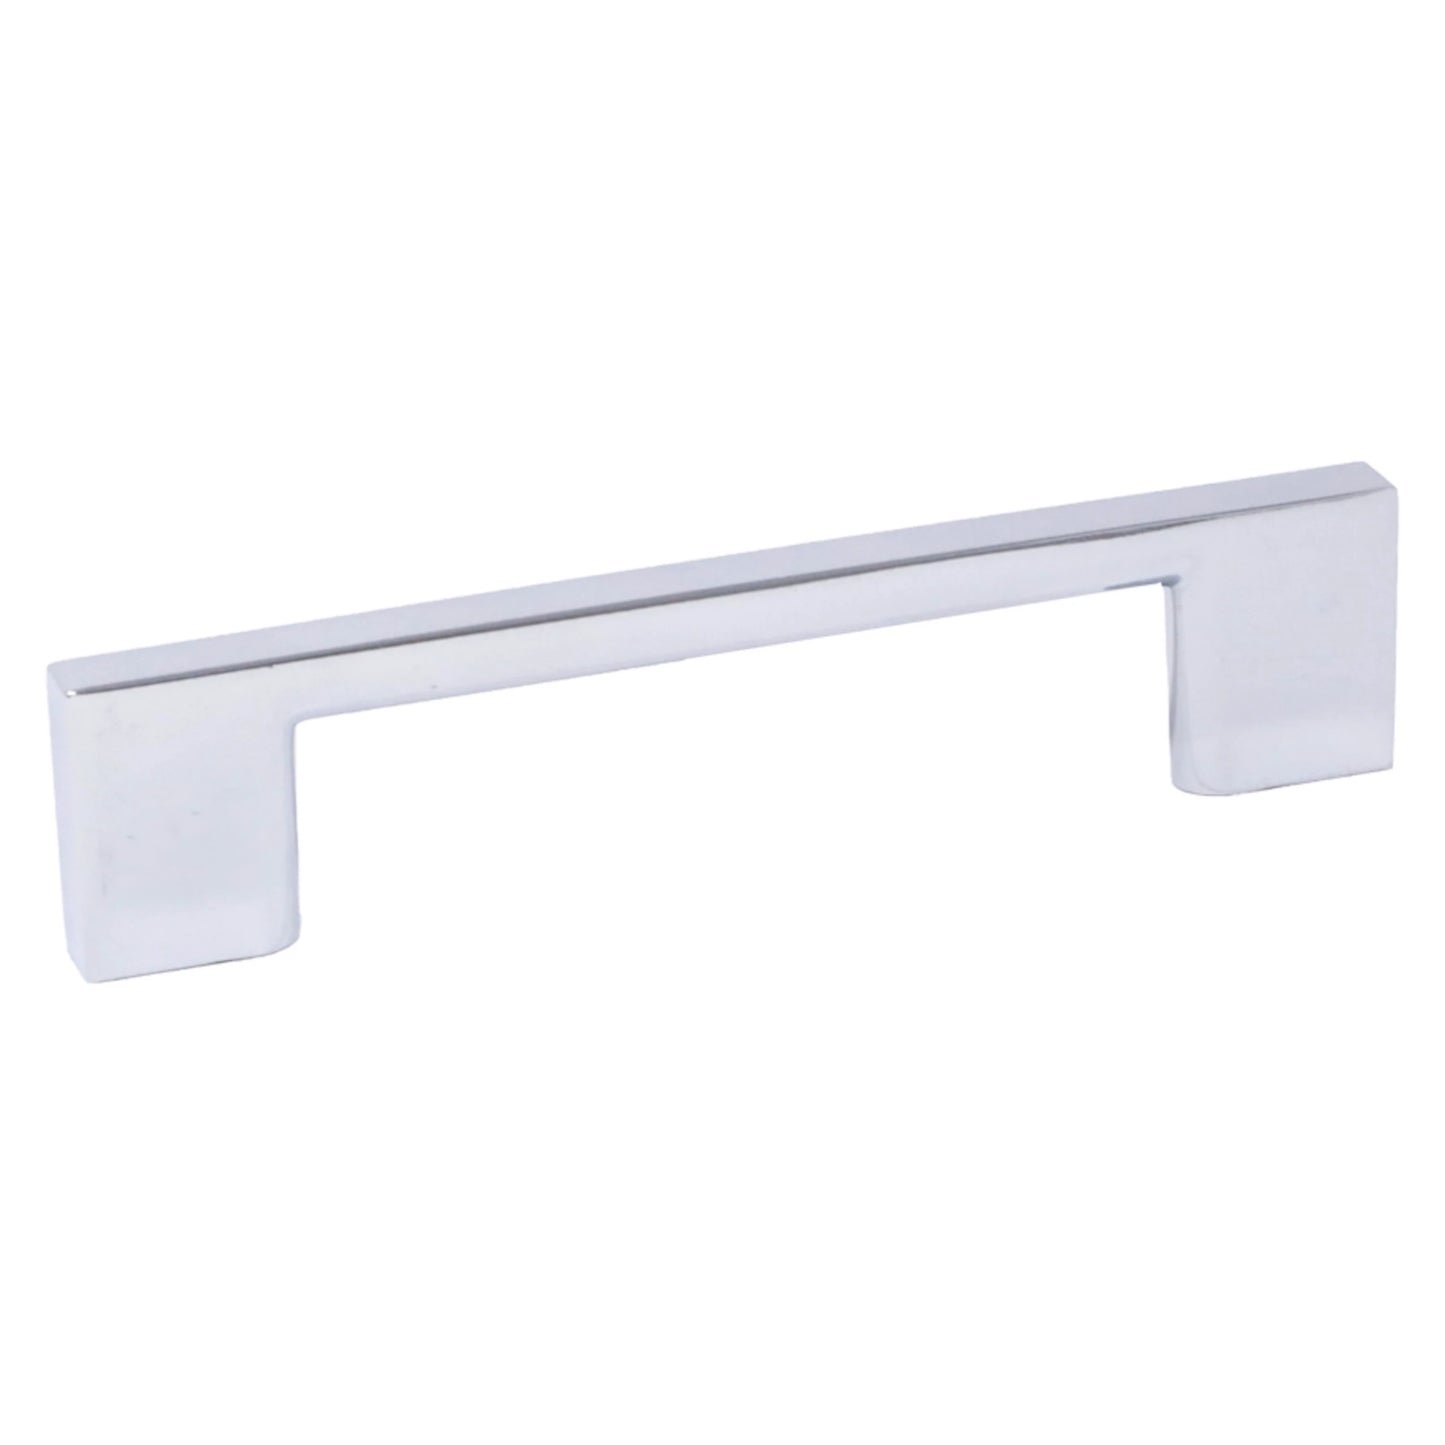 3-Inch Downtown Kitchen & Bath Cabinet Rectangle Bar Pull